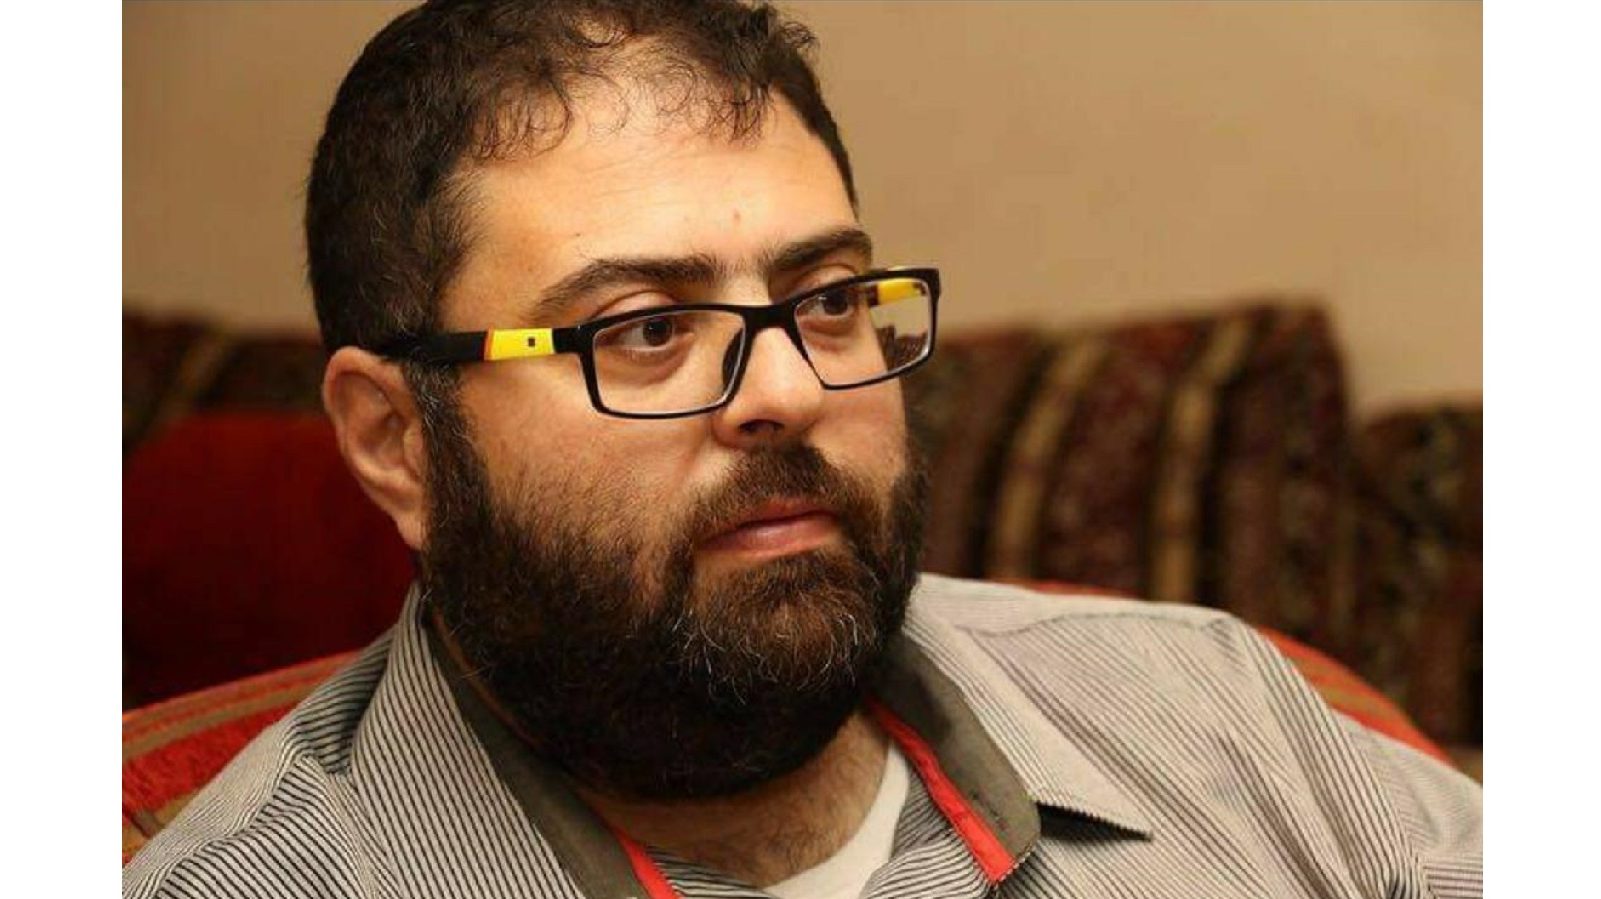 Arab Israeli Journalist Who Covered Violent Crime Gunned Down in His Car